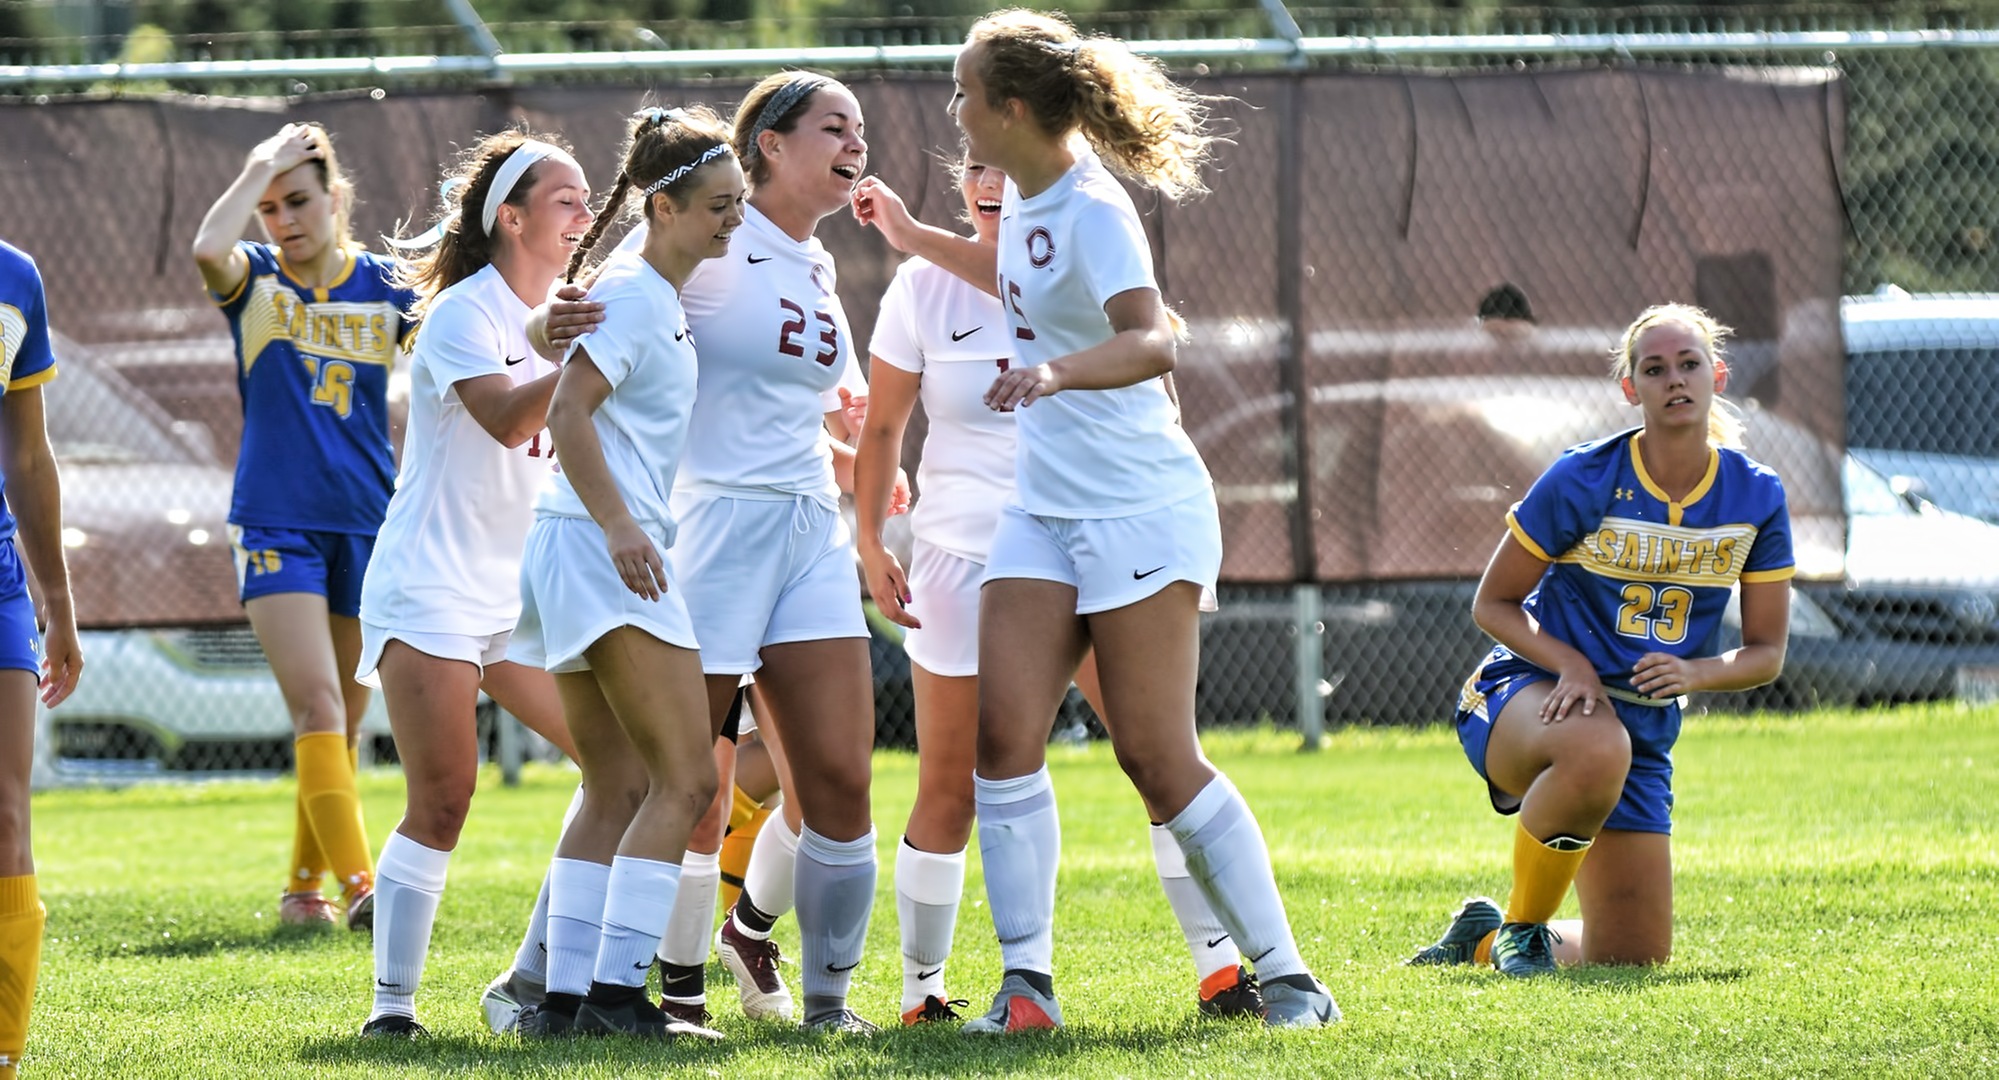 Teammates congratulate Kirsten Bokinskie after she scores one of her two goals in the Cobbers' 3-0 win vs. St. Scholastica.